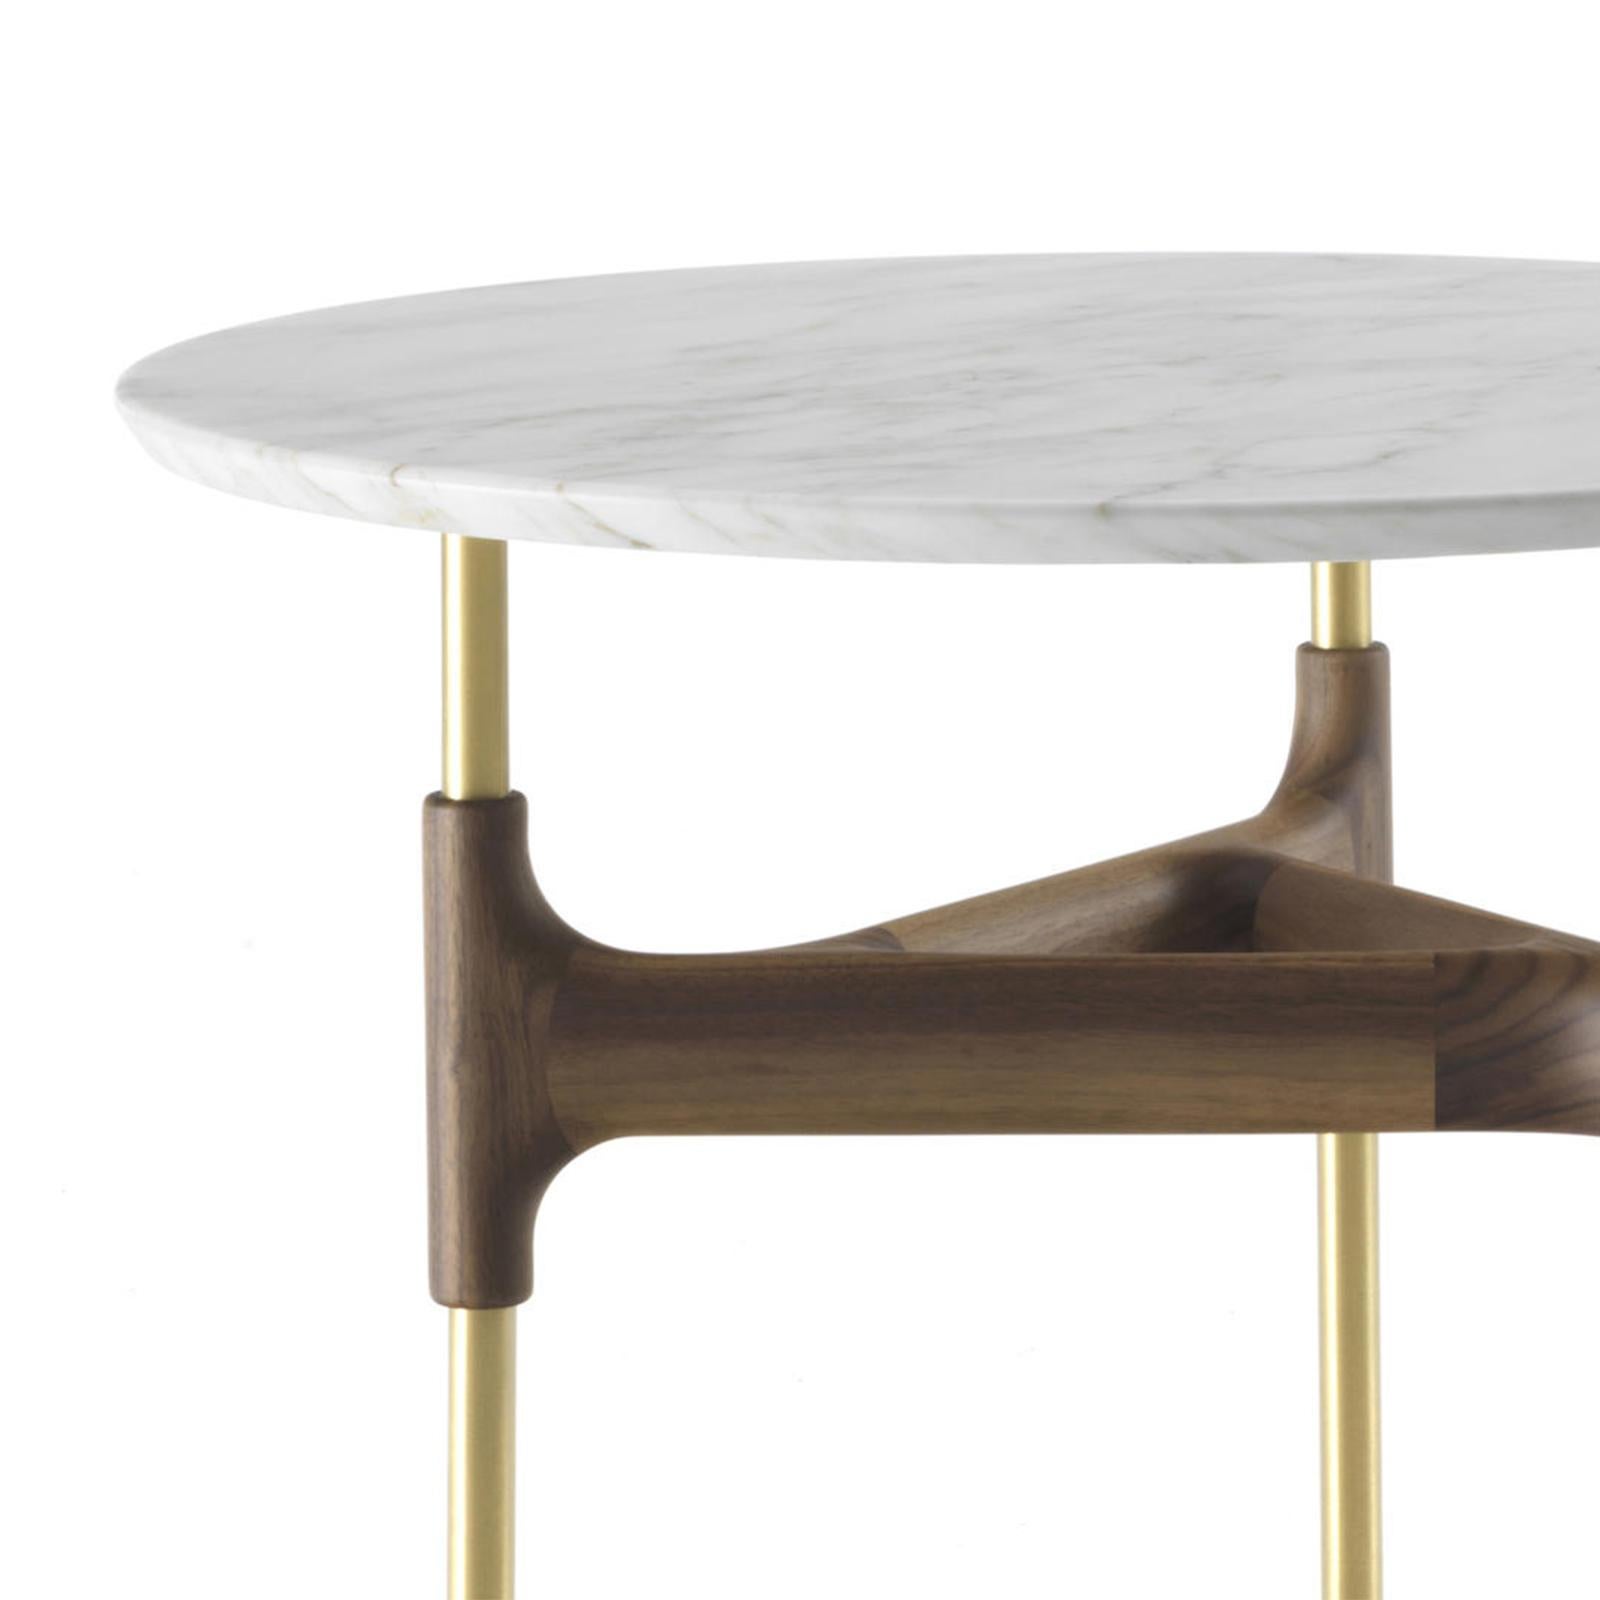 Side table paloma marble with hand-crafted
solid walnut base with steel feet in brass finish.
With white calacatta oro marble top.
Also available with black marble top or emperador
marble top, on request.